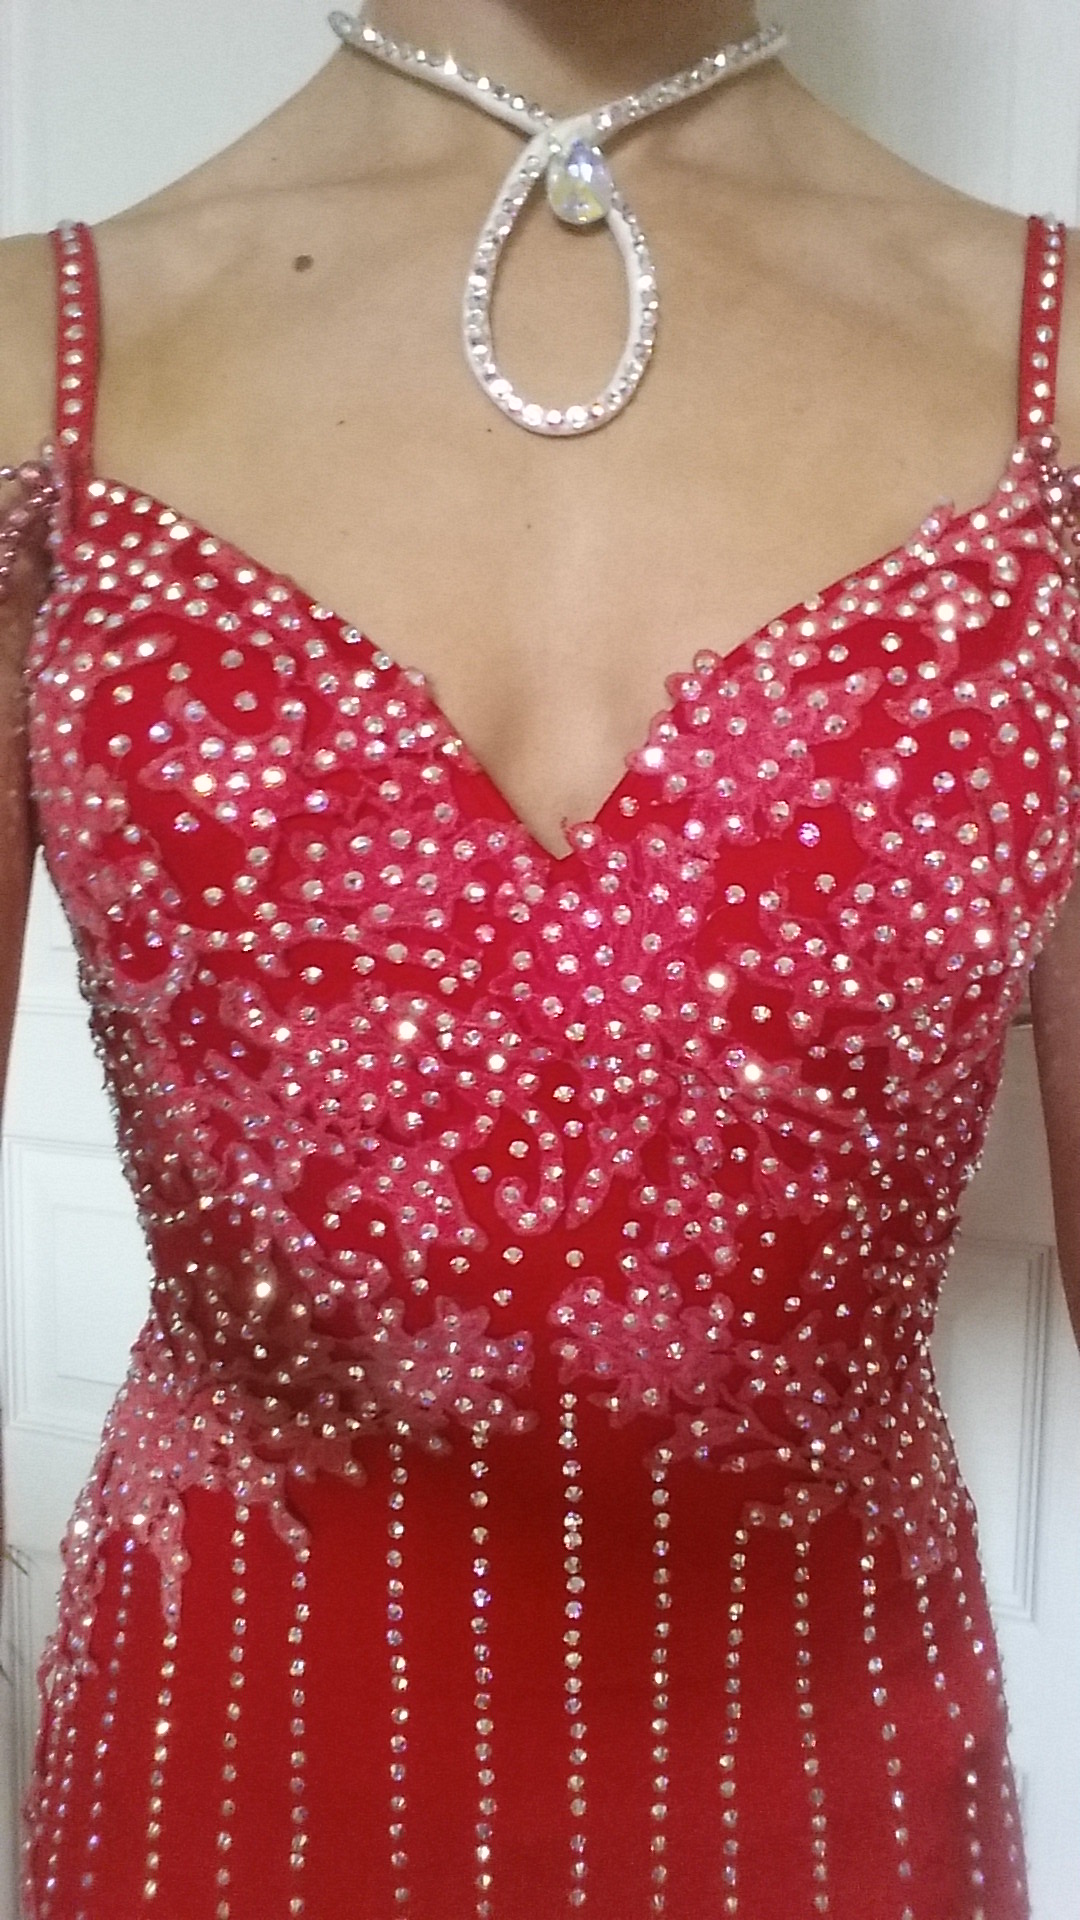 T064 Red Standard Dance Dress for sale - Dreamgown